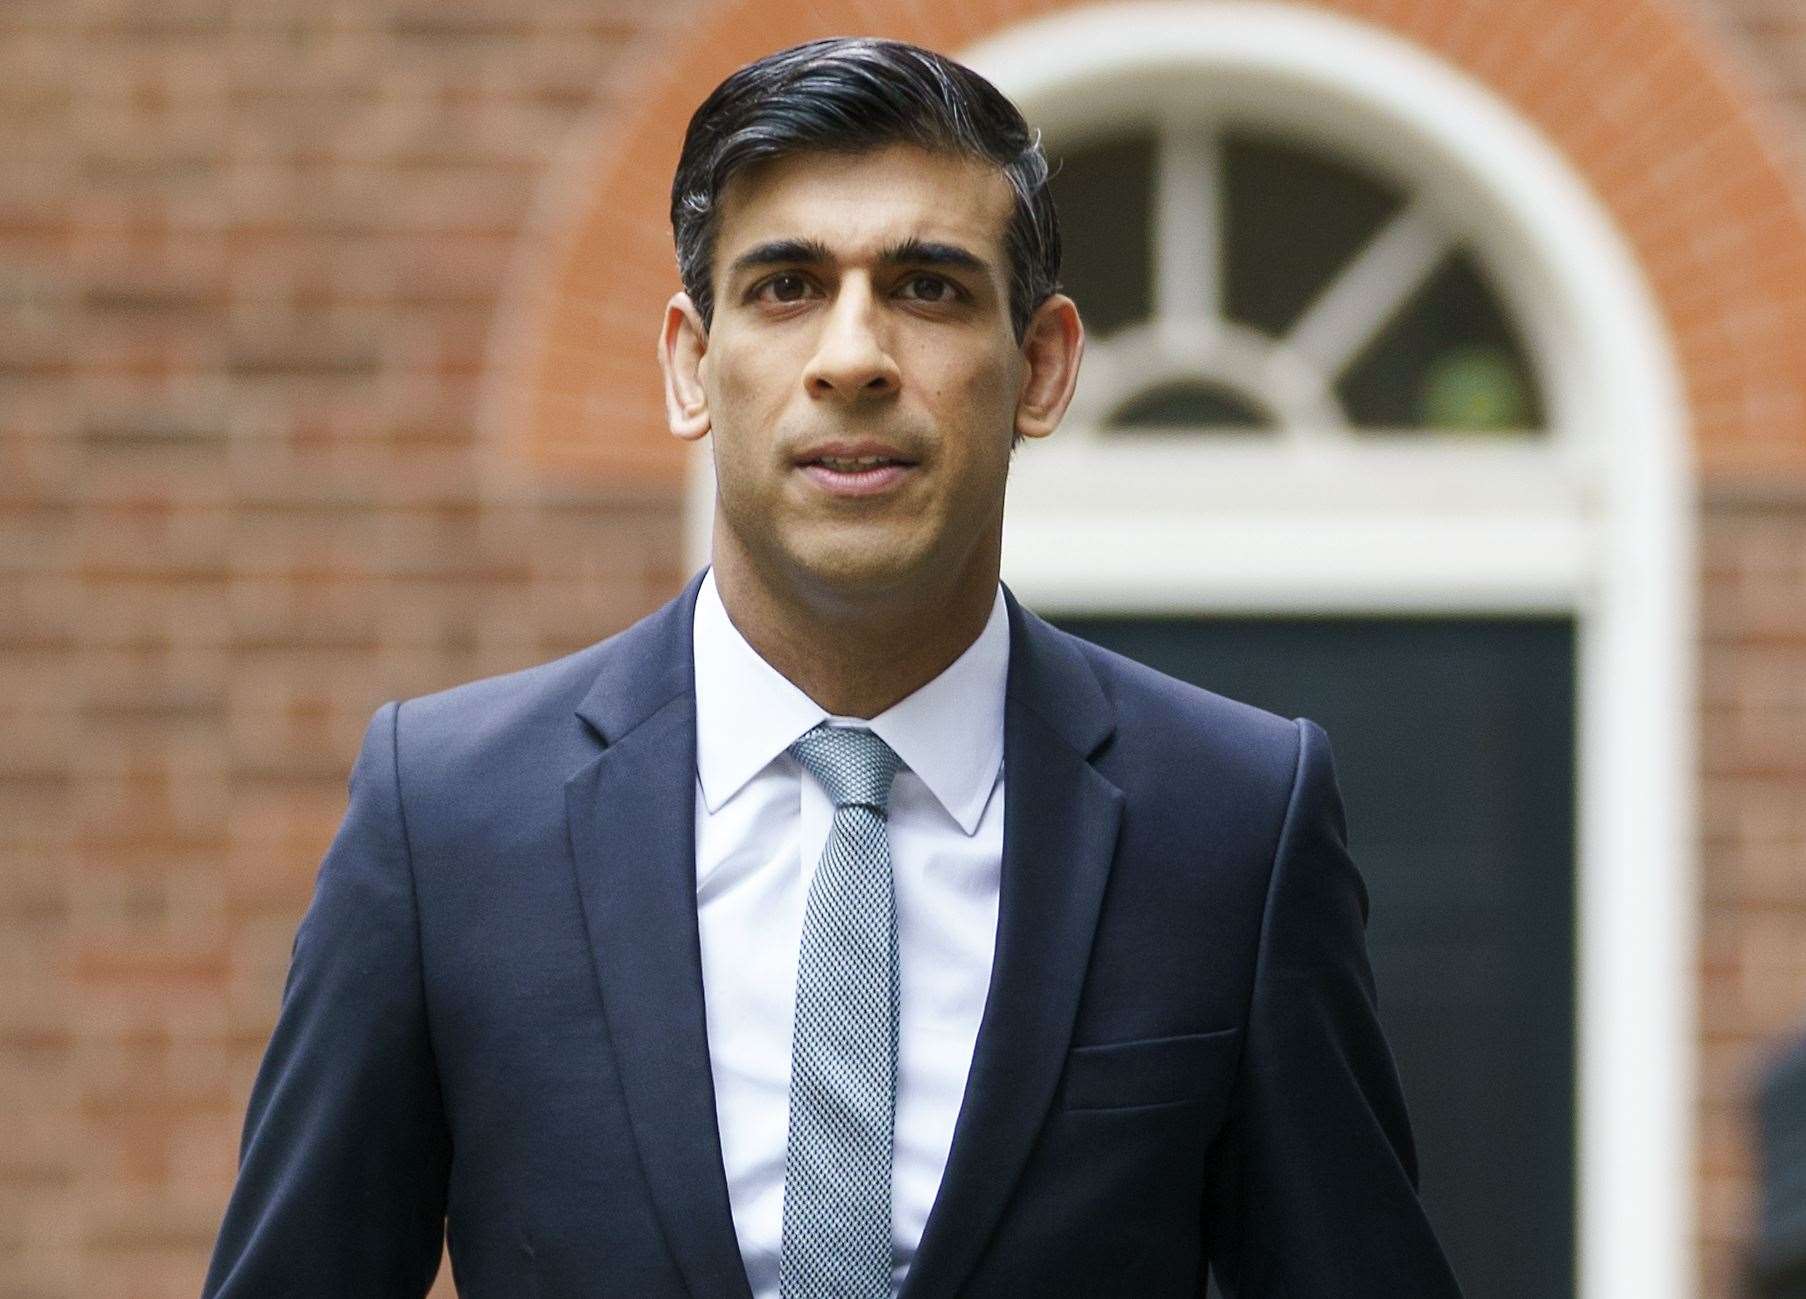 Chancellor Rishi Sunak has committed more spending to help firms due to the lockdown. Picture: Pippa Fowles/No 10 Downing Street